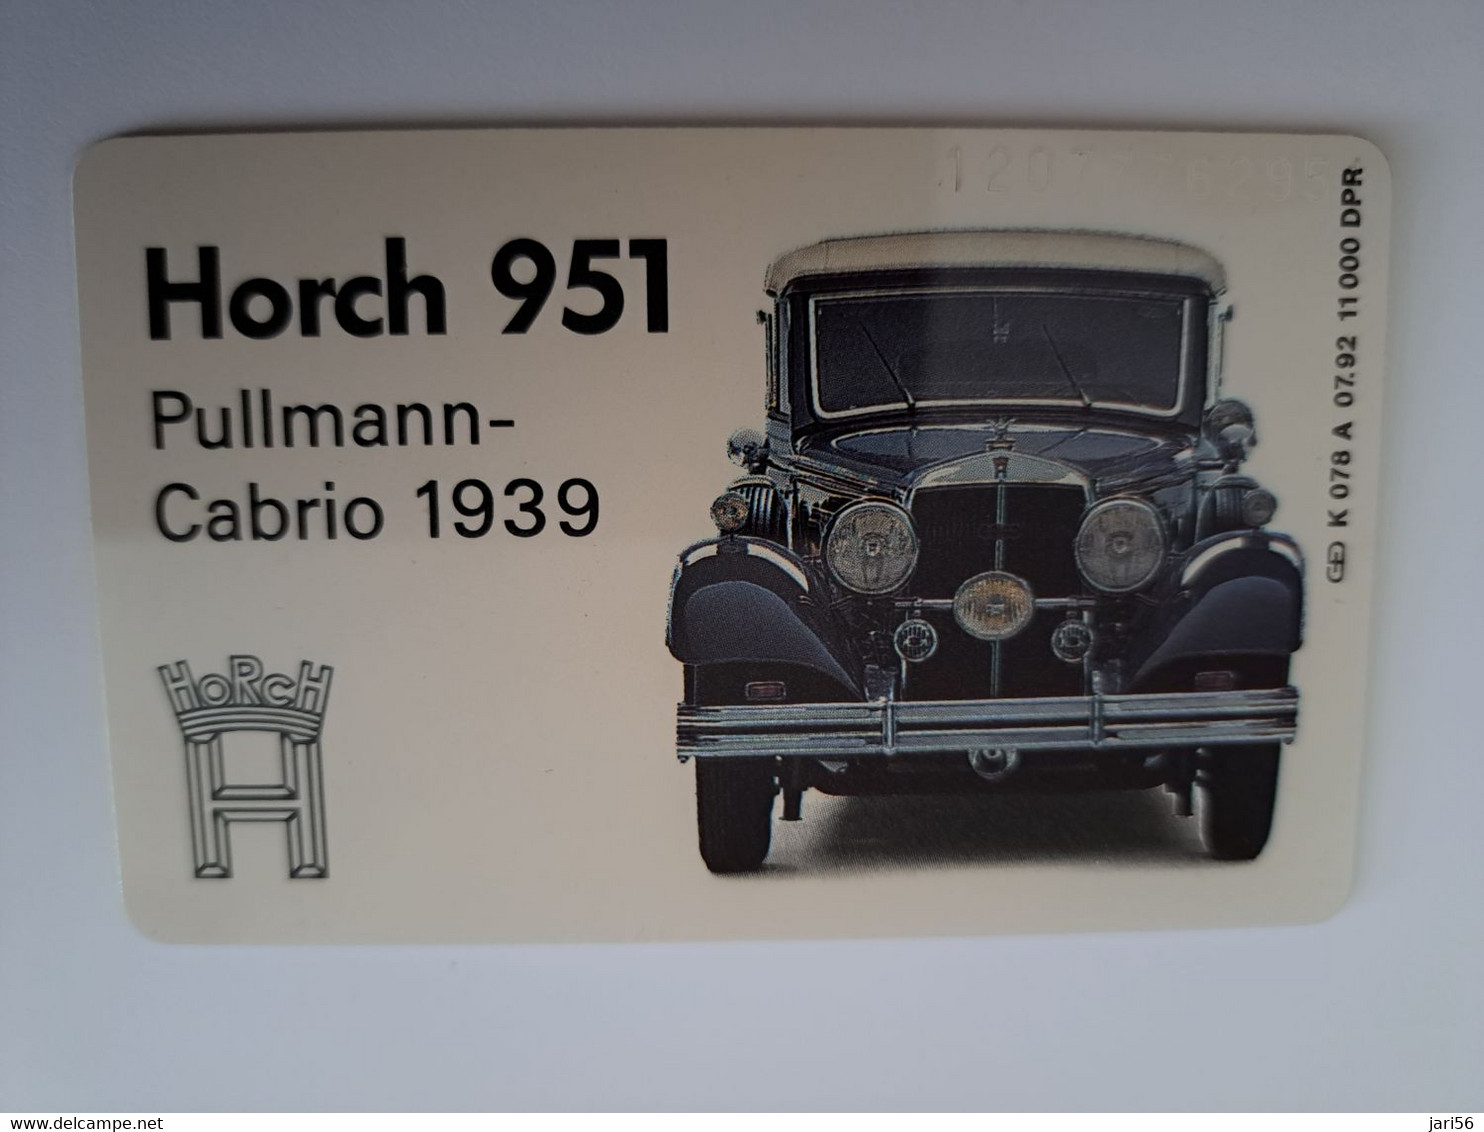 DUITSLAND/ GERMANY  CHIPCARD  K 078 / PULMAN CABRIO 1939 / CARS  ONLY 11000 EX  MINT  CARD **12014** - K-Serie : Serie Clienti